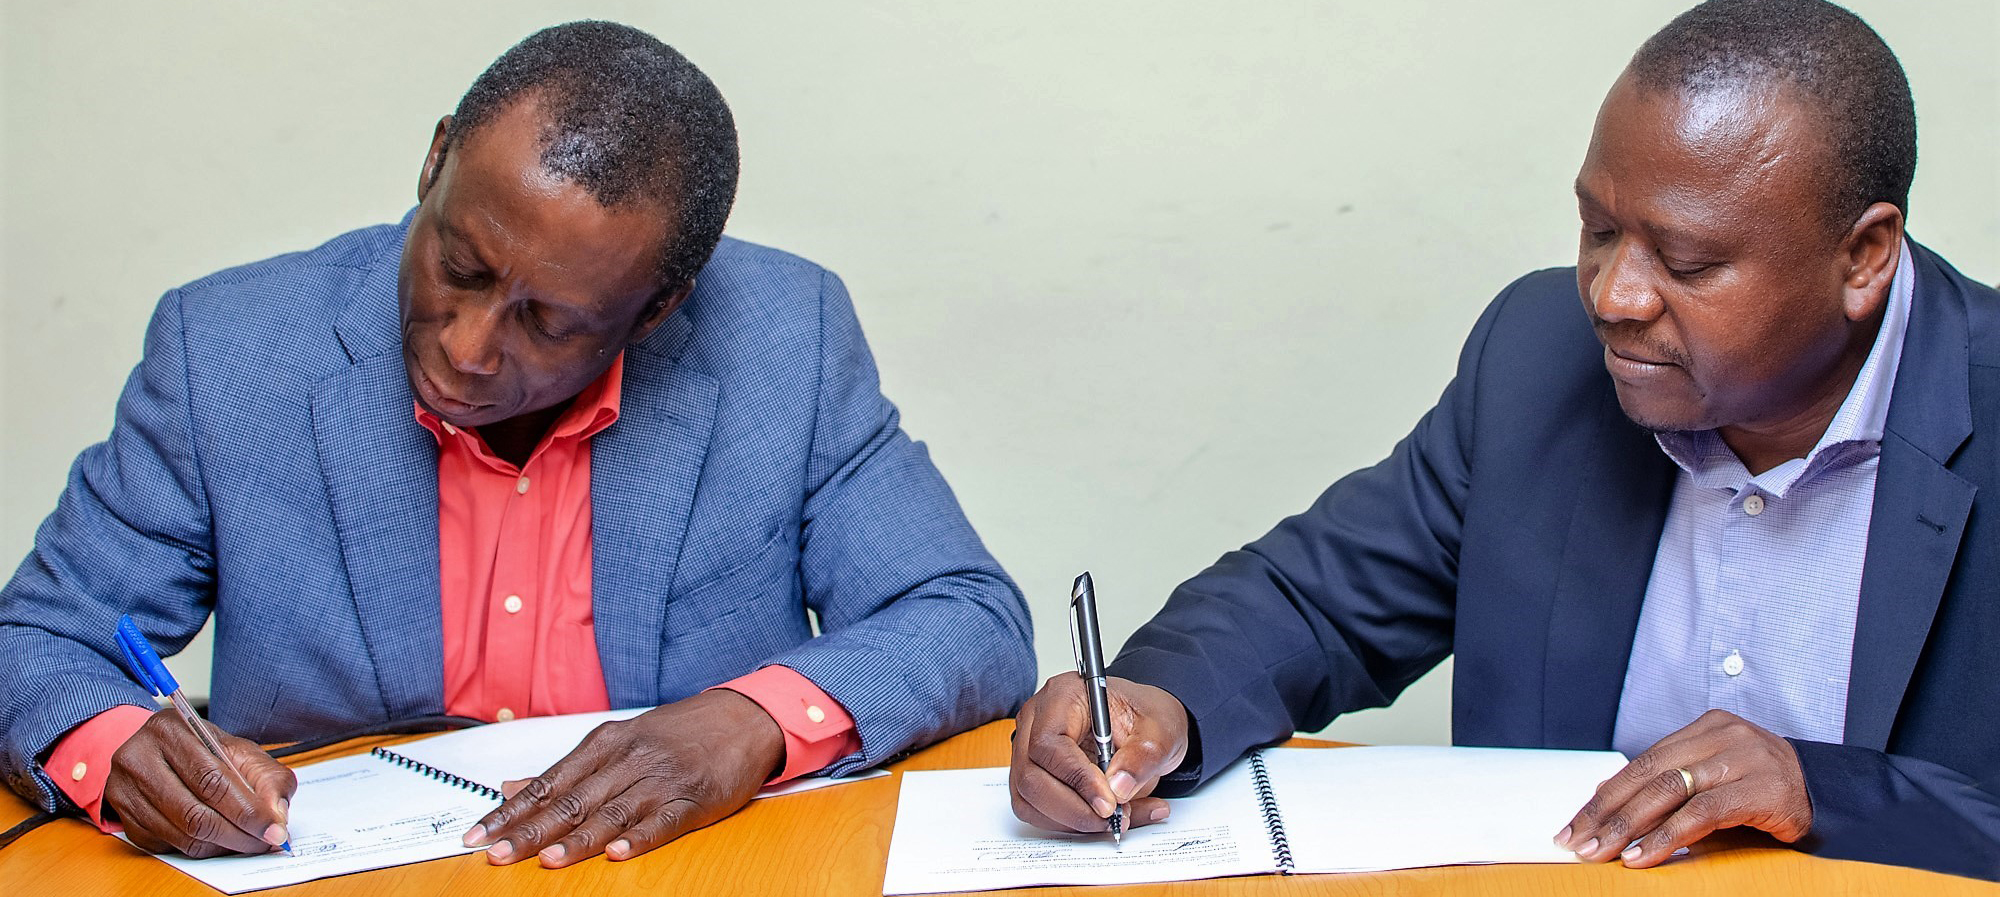 Prof. Francis Dodoo (Pro. Vice Chancellor, Research, Innovation and Development – University of Ghana) and Deogratius Kimera (Country Director, USAID GHSC-PSM) signing MOU for SCM Workforce Development. Photo Credit: GHSC-PSM